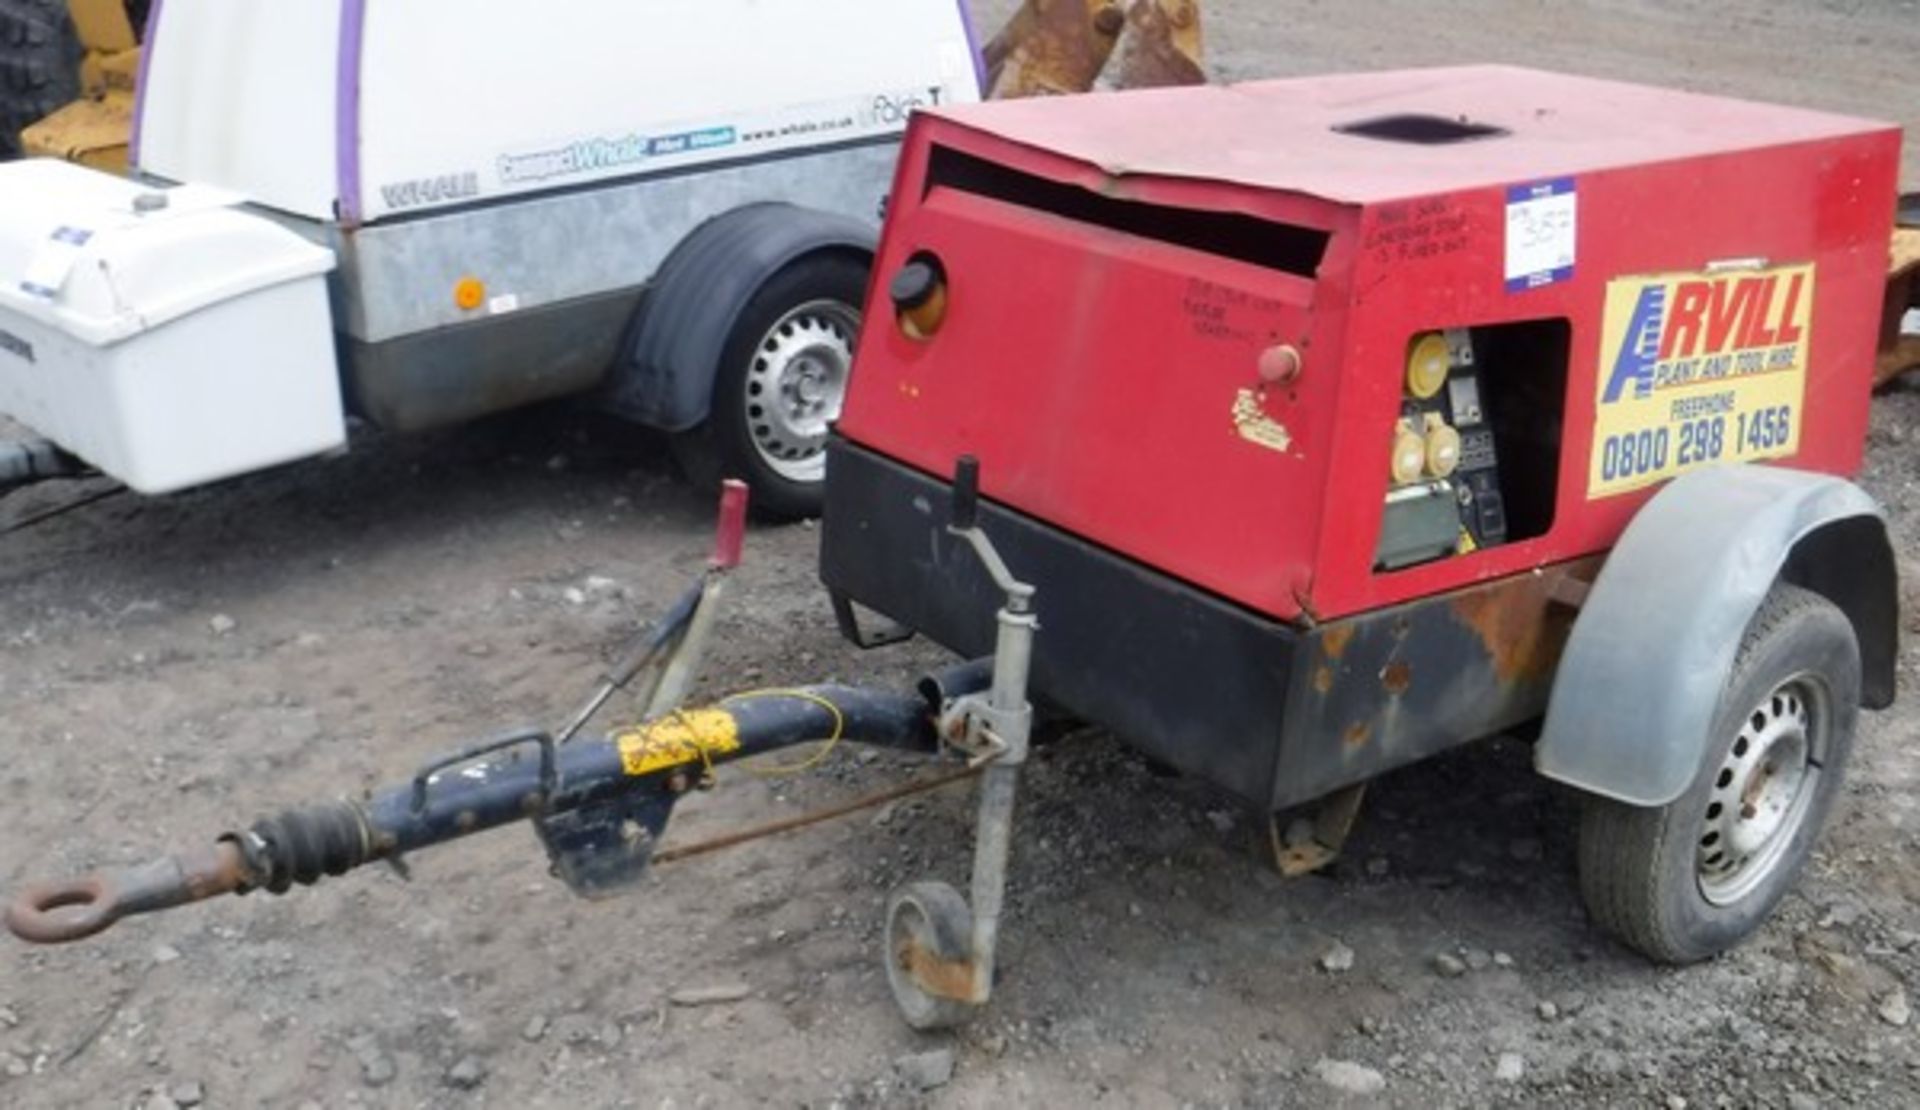 2006 MOSA S15 15kva diesel gen set on chassis road tow. 3817hrs (not veritifed).